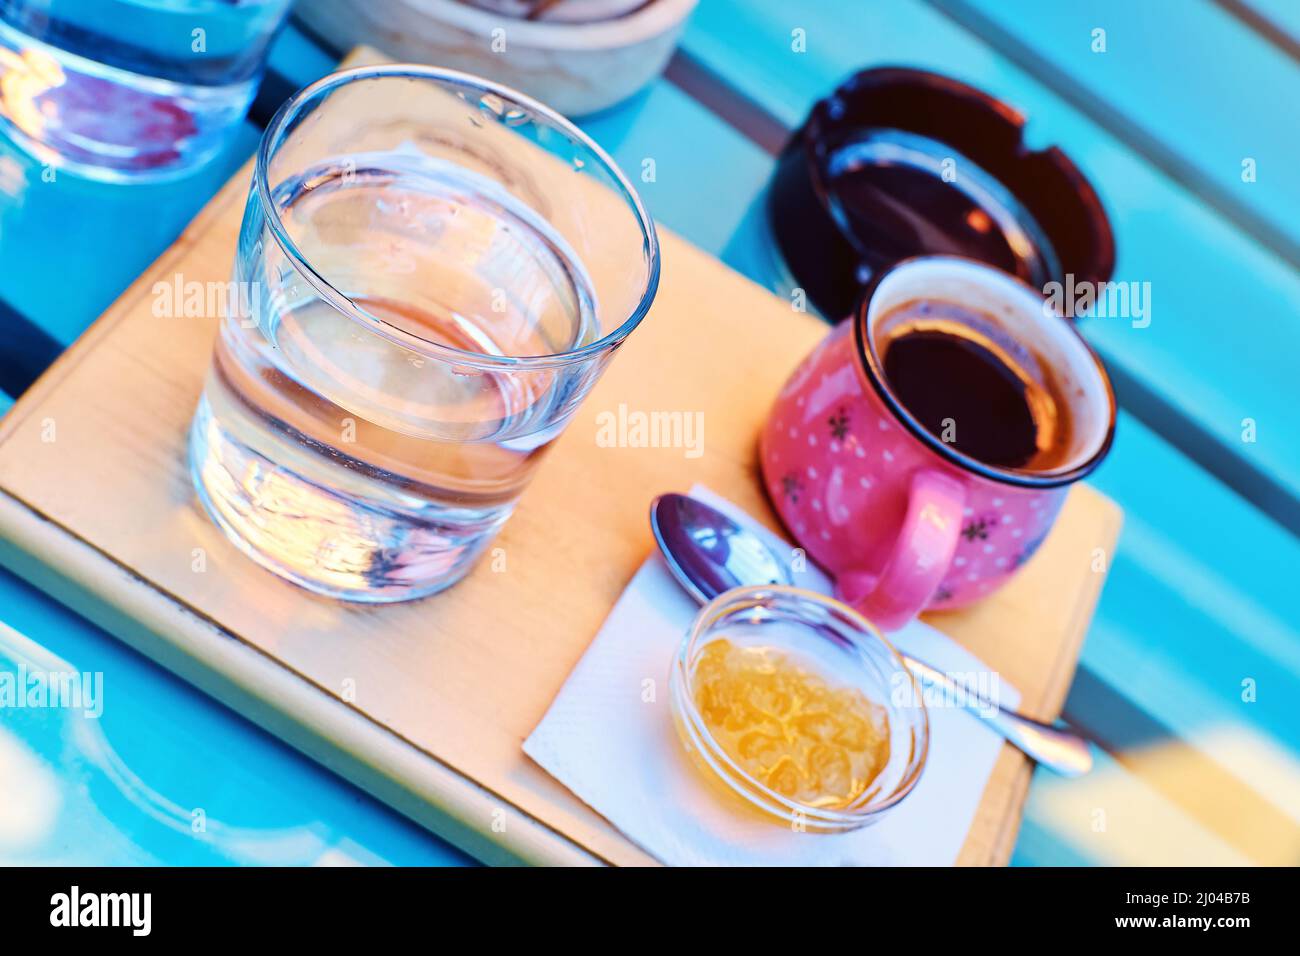 Angled view of colorful black coffee cafe set Stock Photo